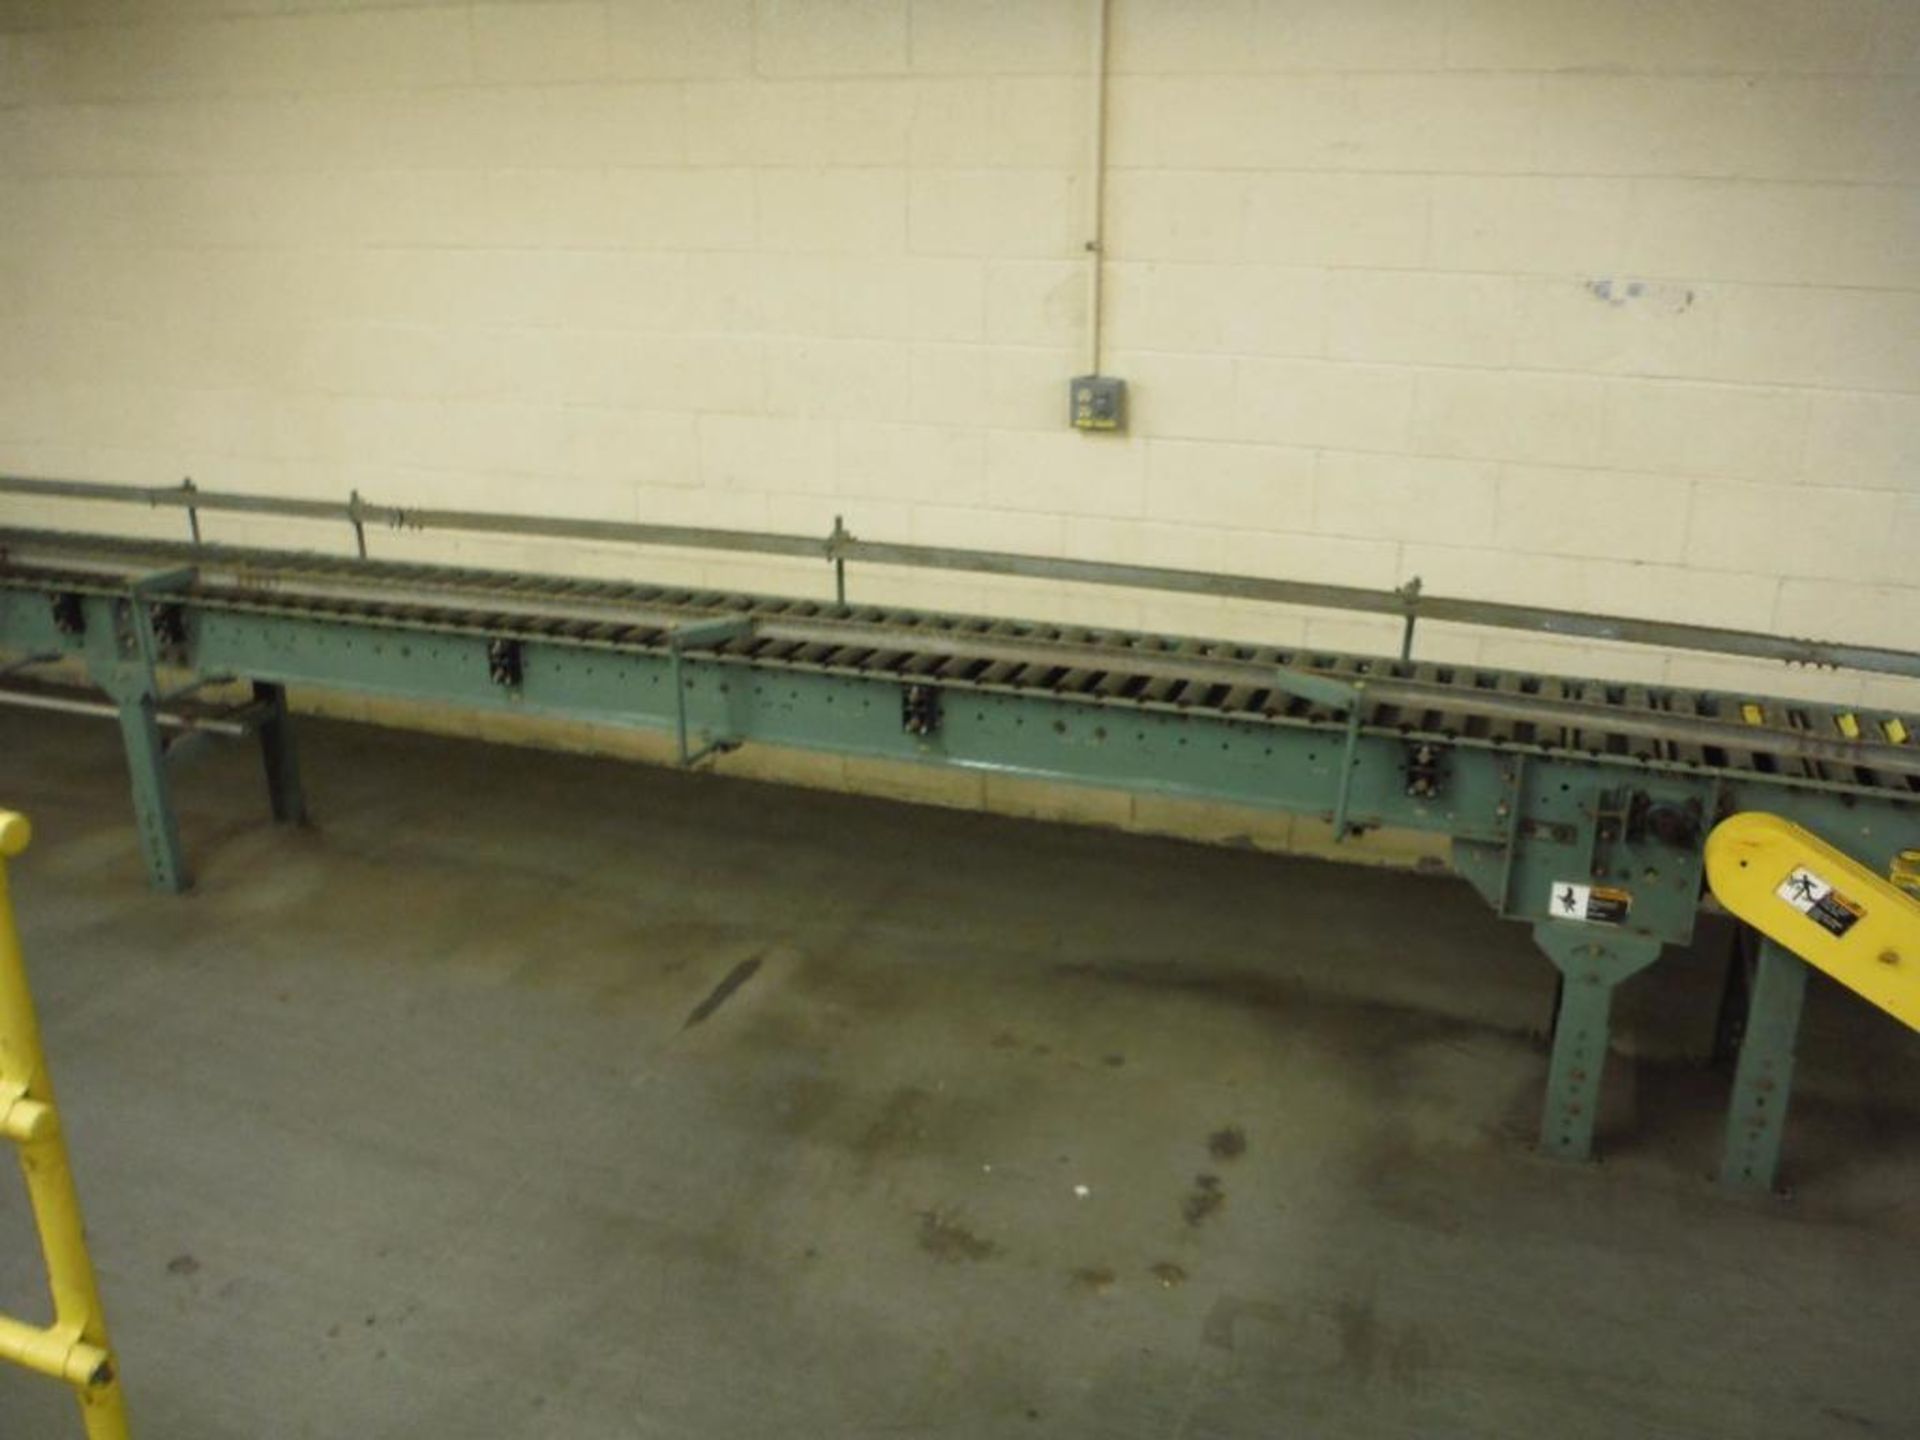 Hytrol powered roller conveyor, 126 ft. long x 15 in. wide, with (2) 90 degree turns, motors and - Image 10 of 13